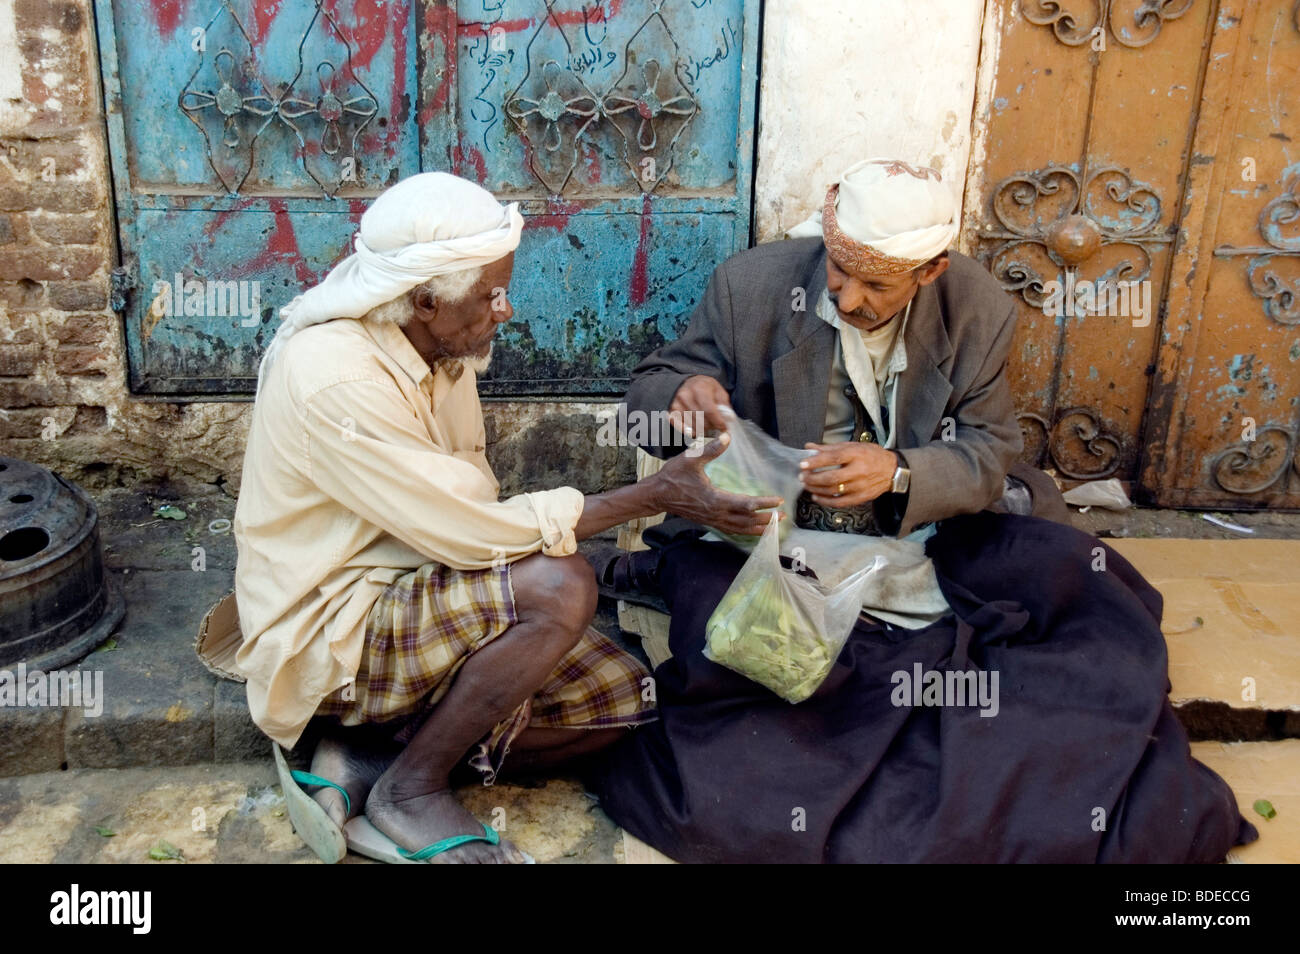 A man purchasing a bag of khat or qat - a chewable leafy stimulant and legal drug - from a merchant in the market in Sanaa, Yemen. Stock Photo